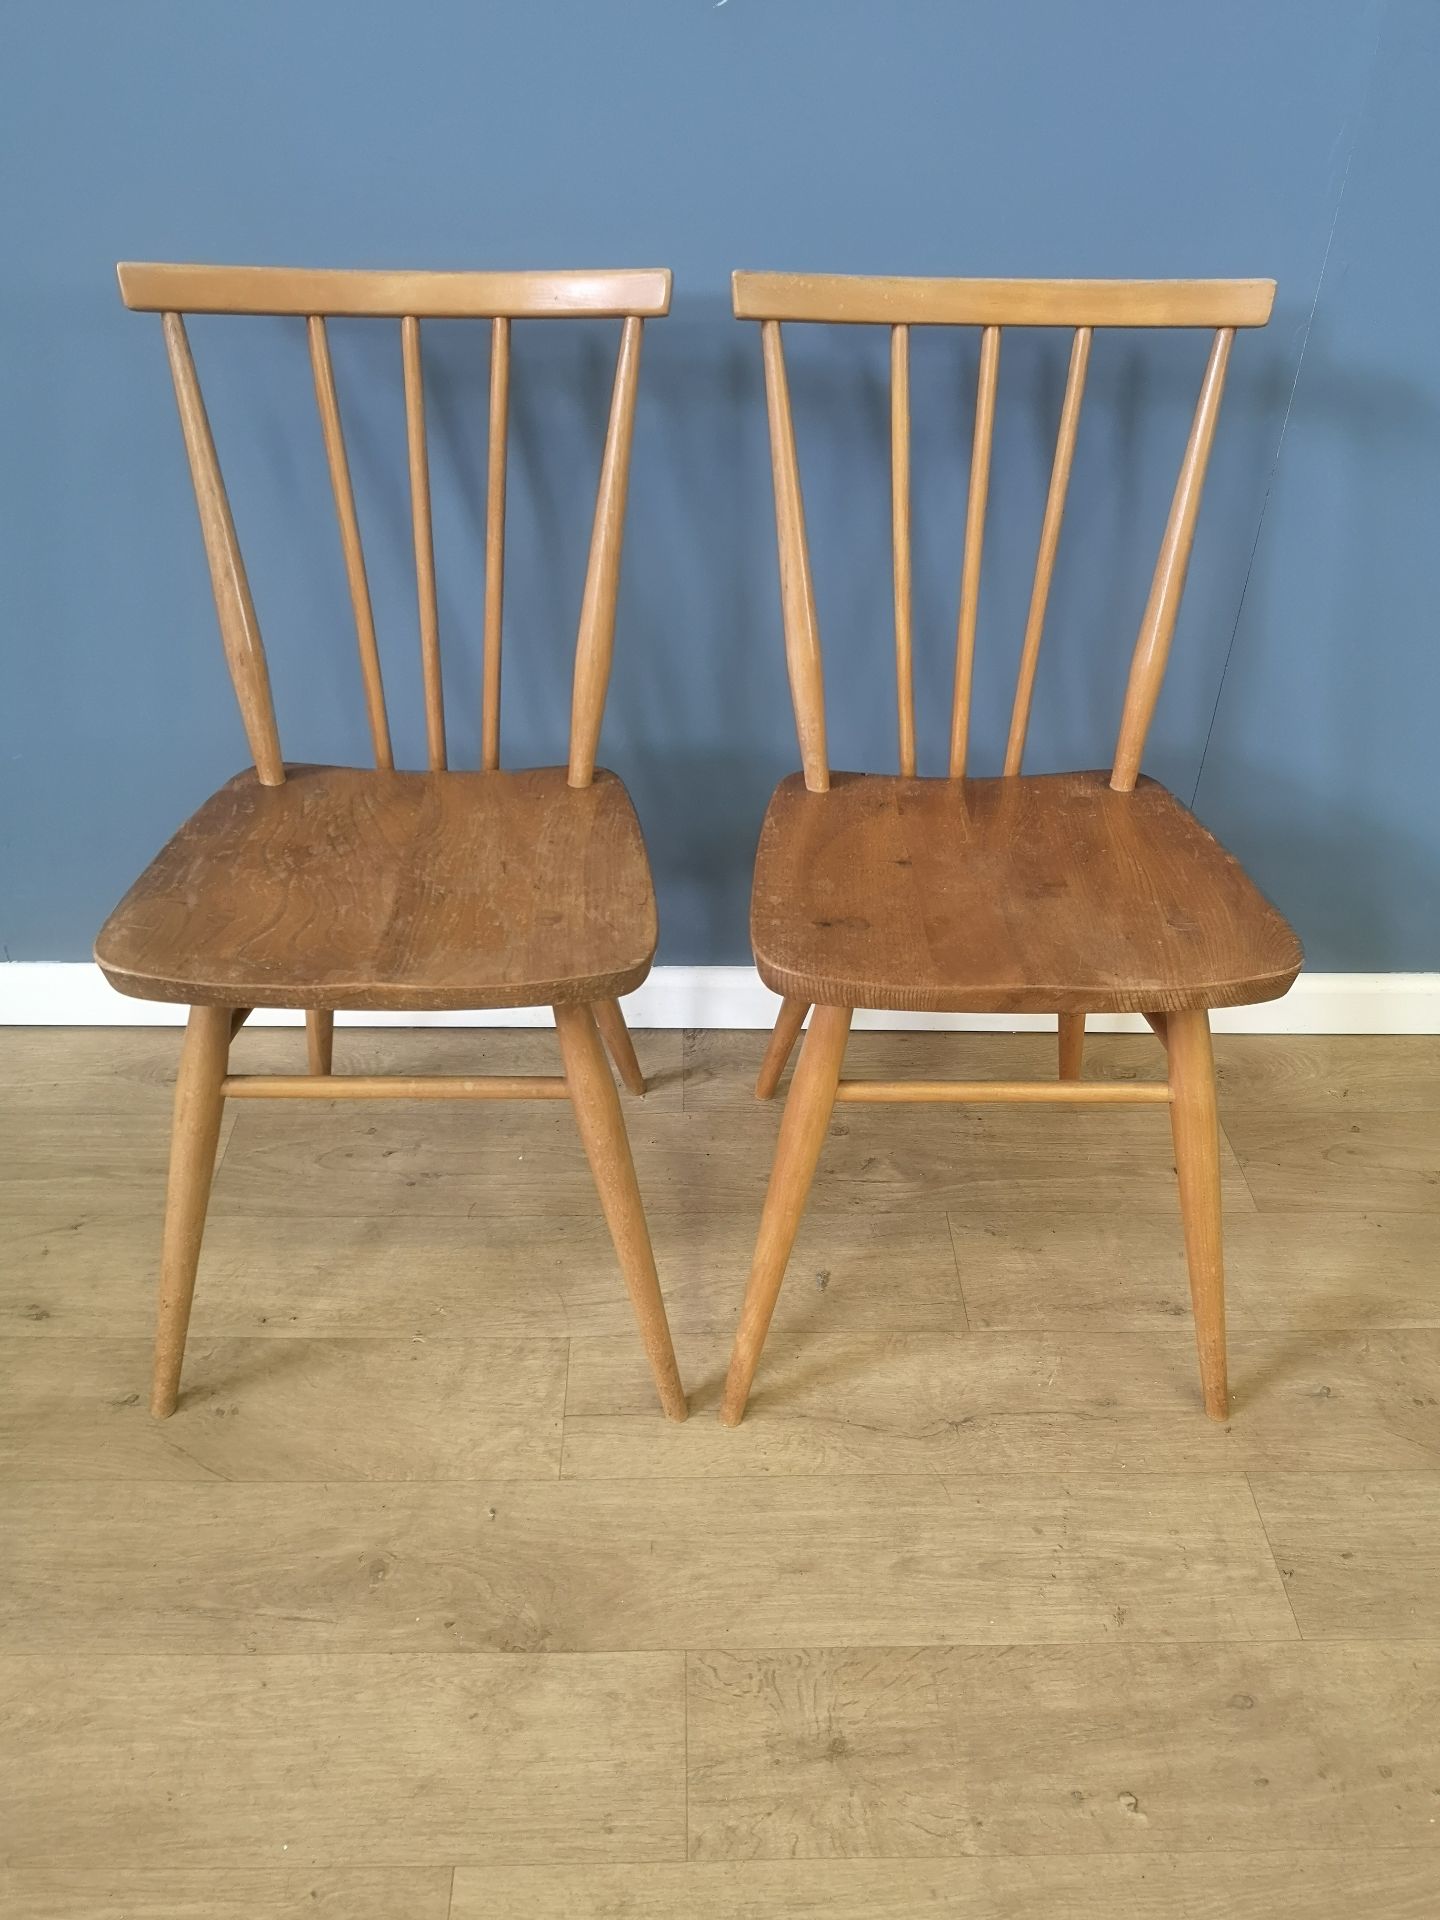 Two Ercol kitchen chairs